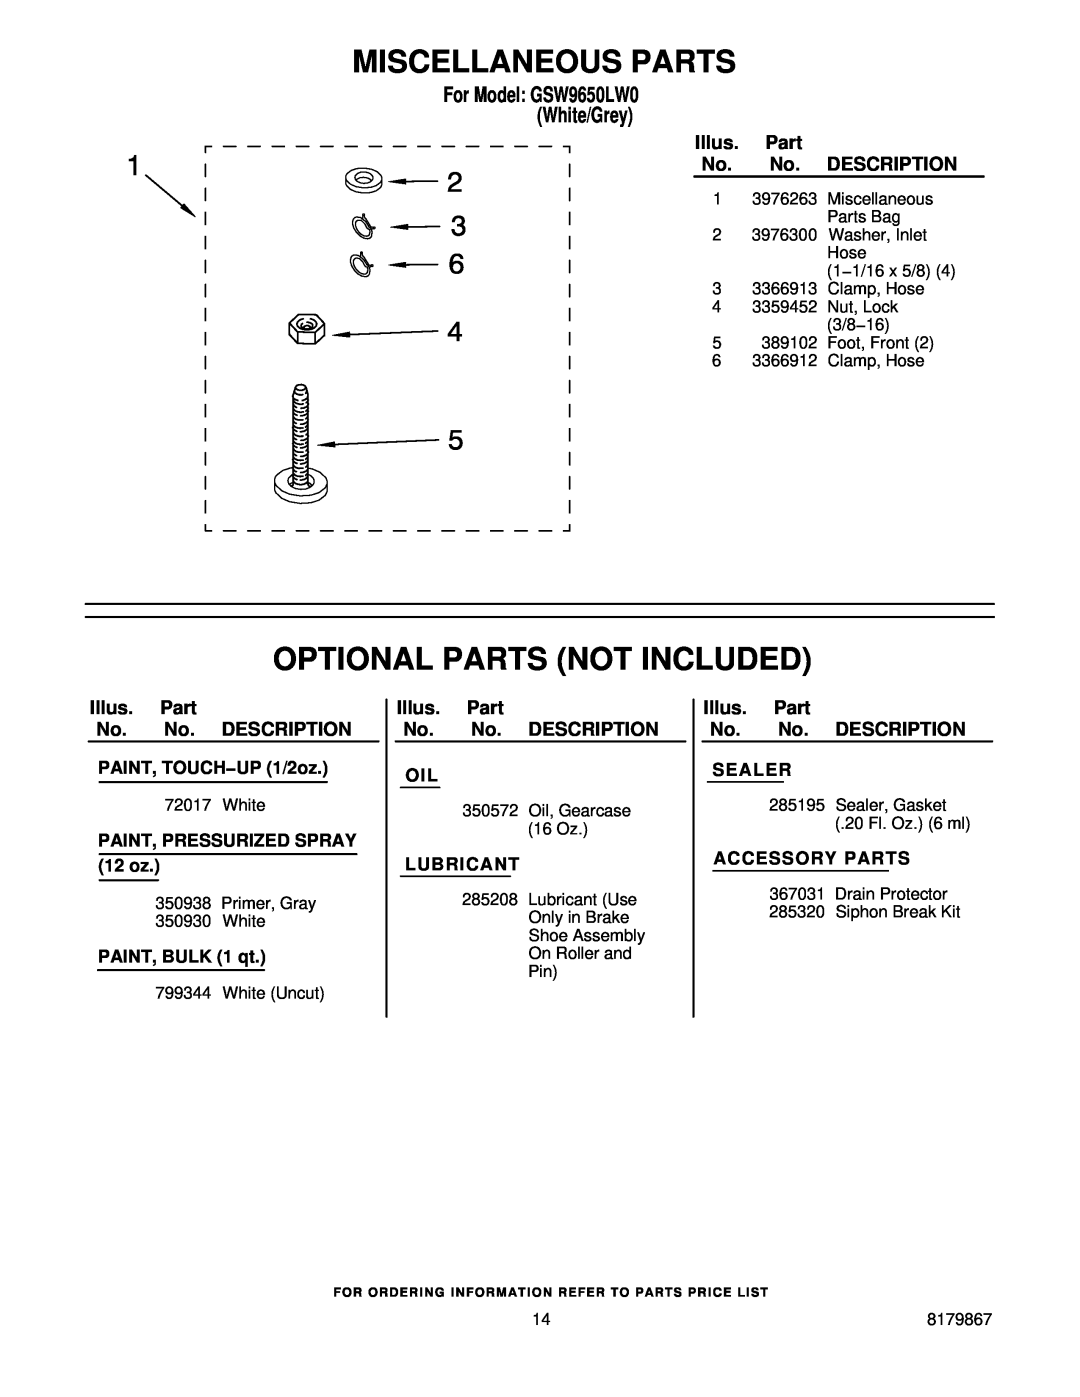 Whirlpool GSW9650LW0 manual Miscellaneous Parts, Optional Parts Not Included 